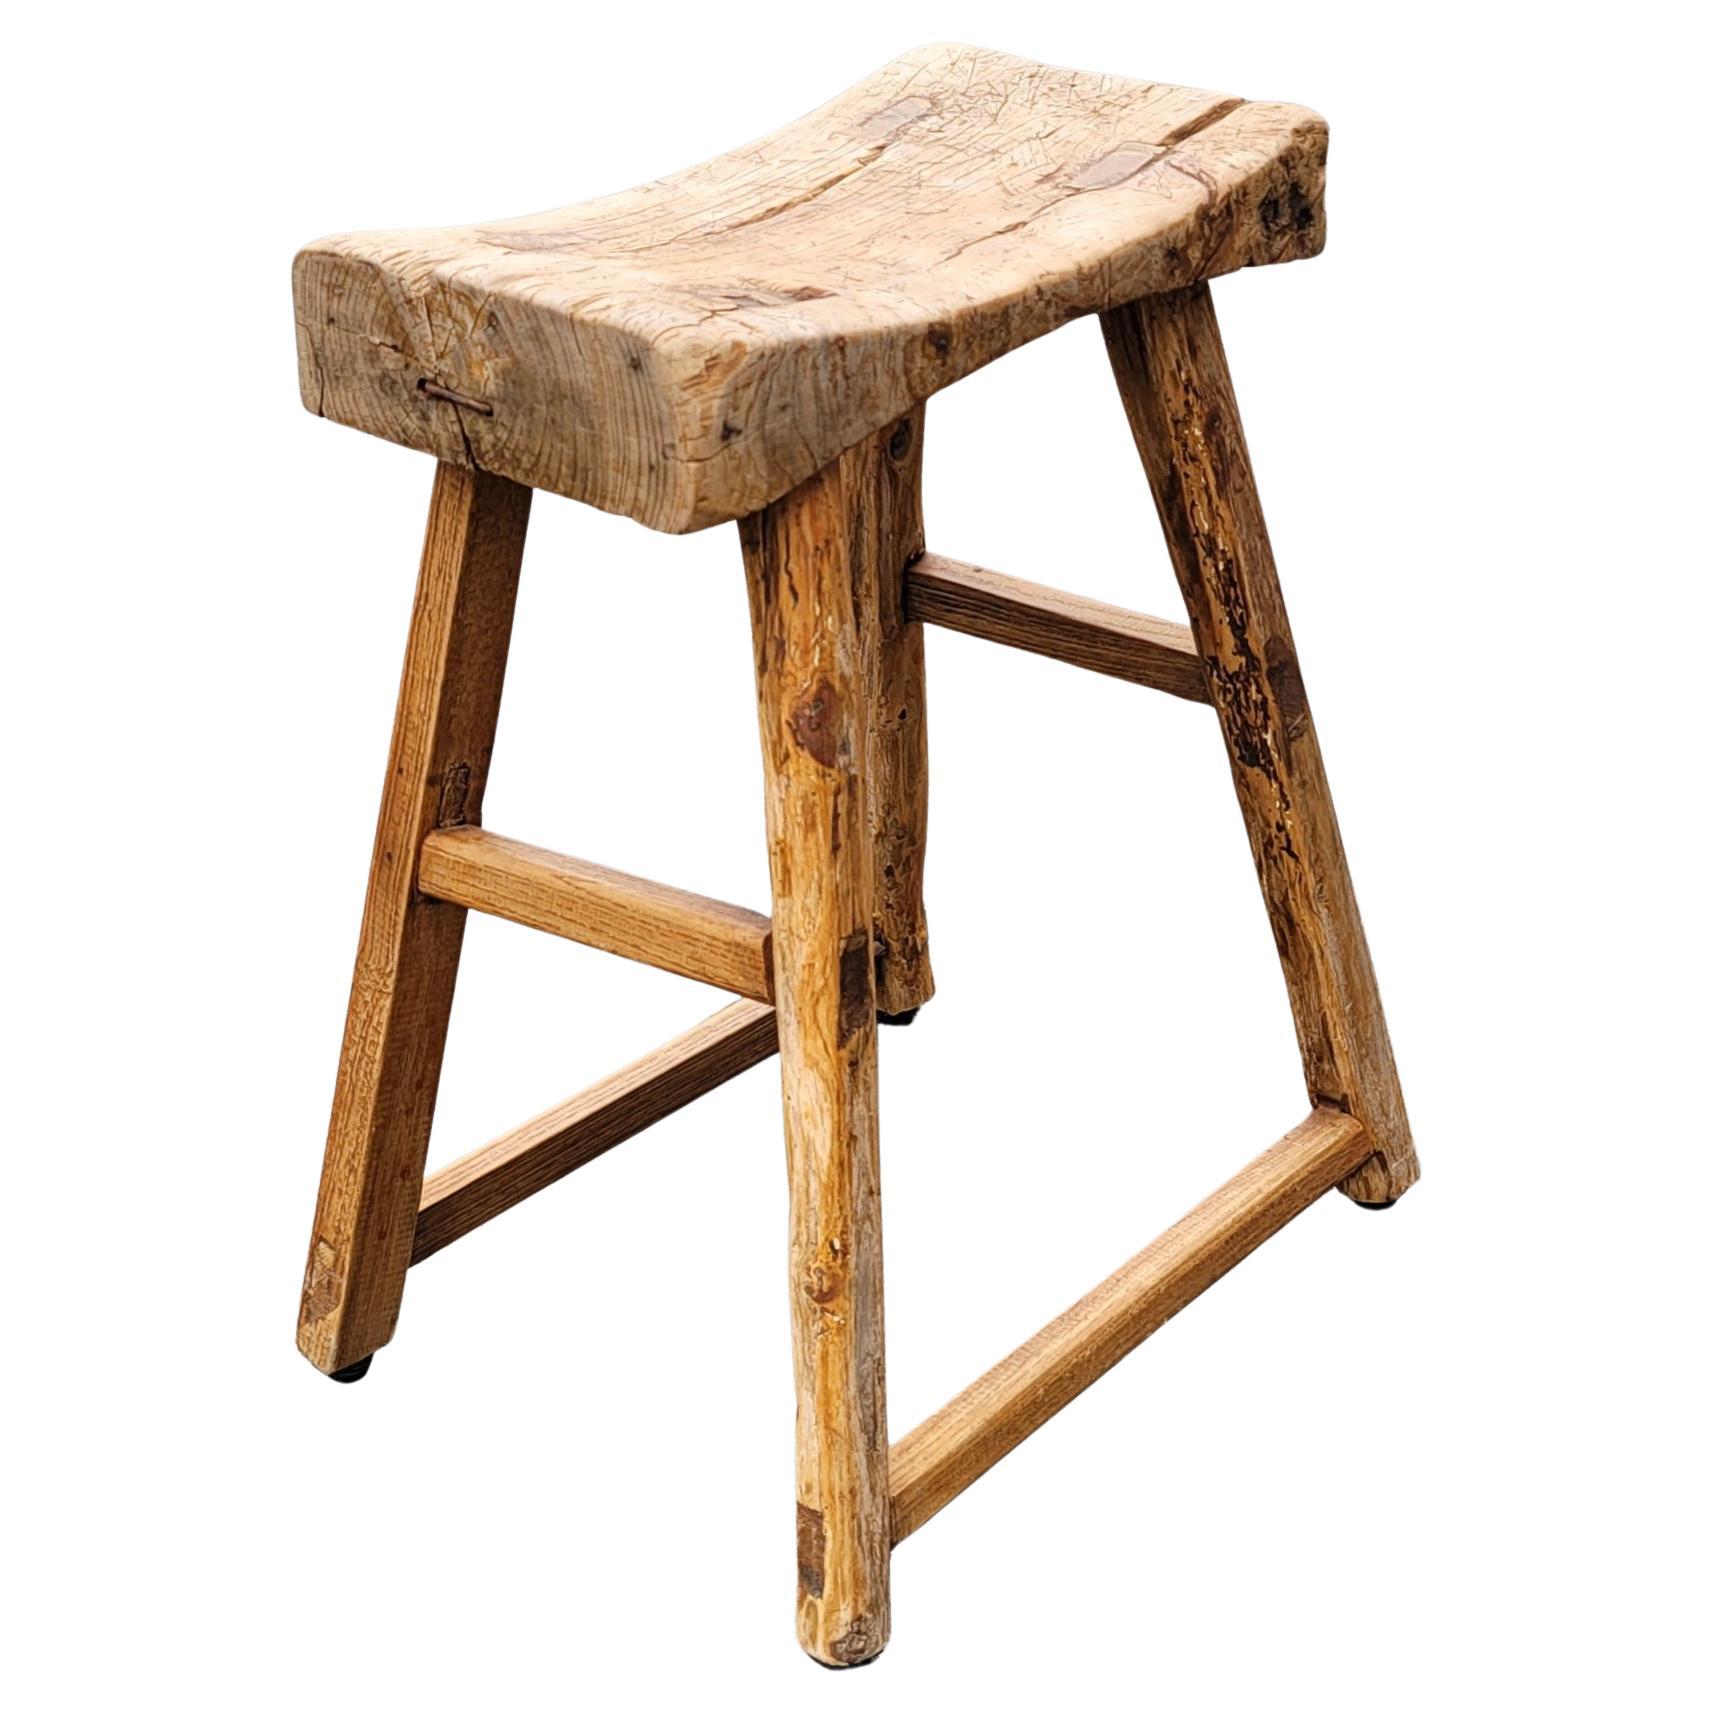 Dated to mid 19th century, this rustic, farmhouse, primitive and brutalist stool has simple splayed-leg design and well-worn finish. Crafted of northern elm wood with mortise-and-tenon joinery, without the use of nails or screws, the stools feature